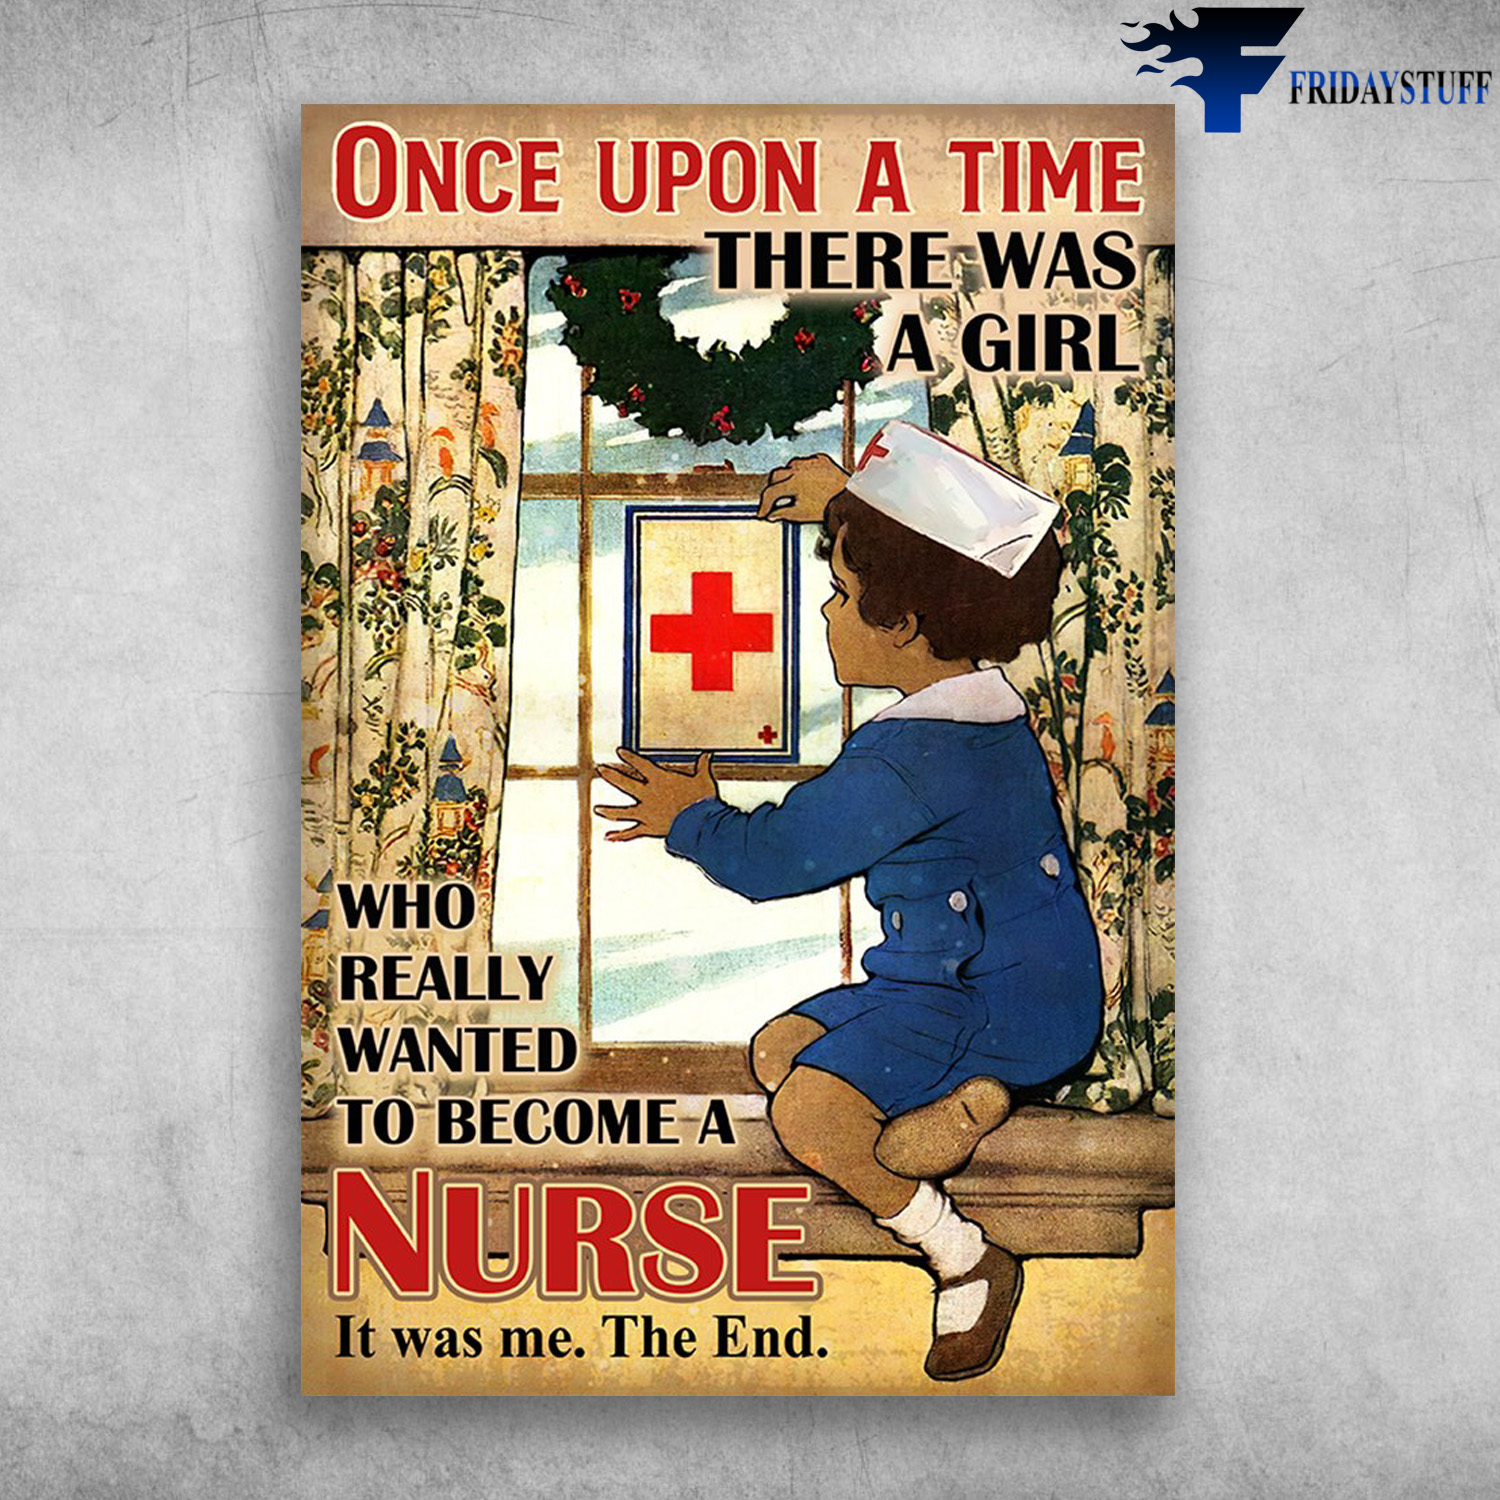 Little Girl Nurse On Christmas - Once Upon A Time, There Was A Girl, Who Really Wanted To Be Come A Nurse, Is Was Me, The End